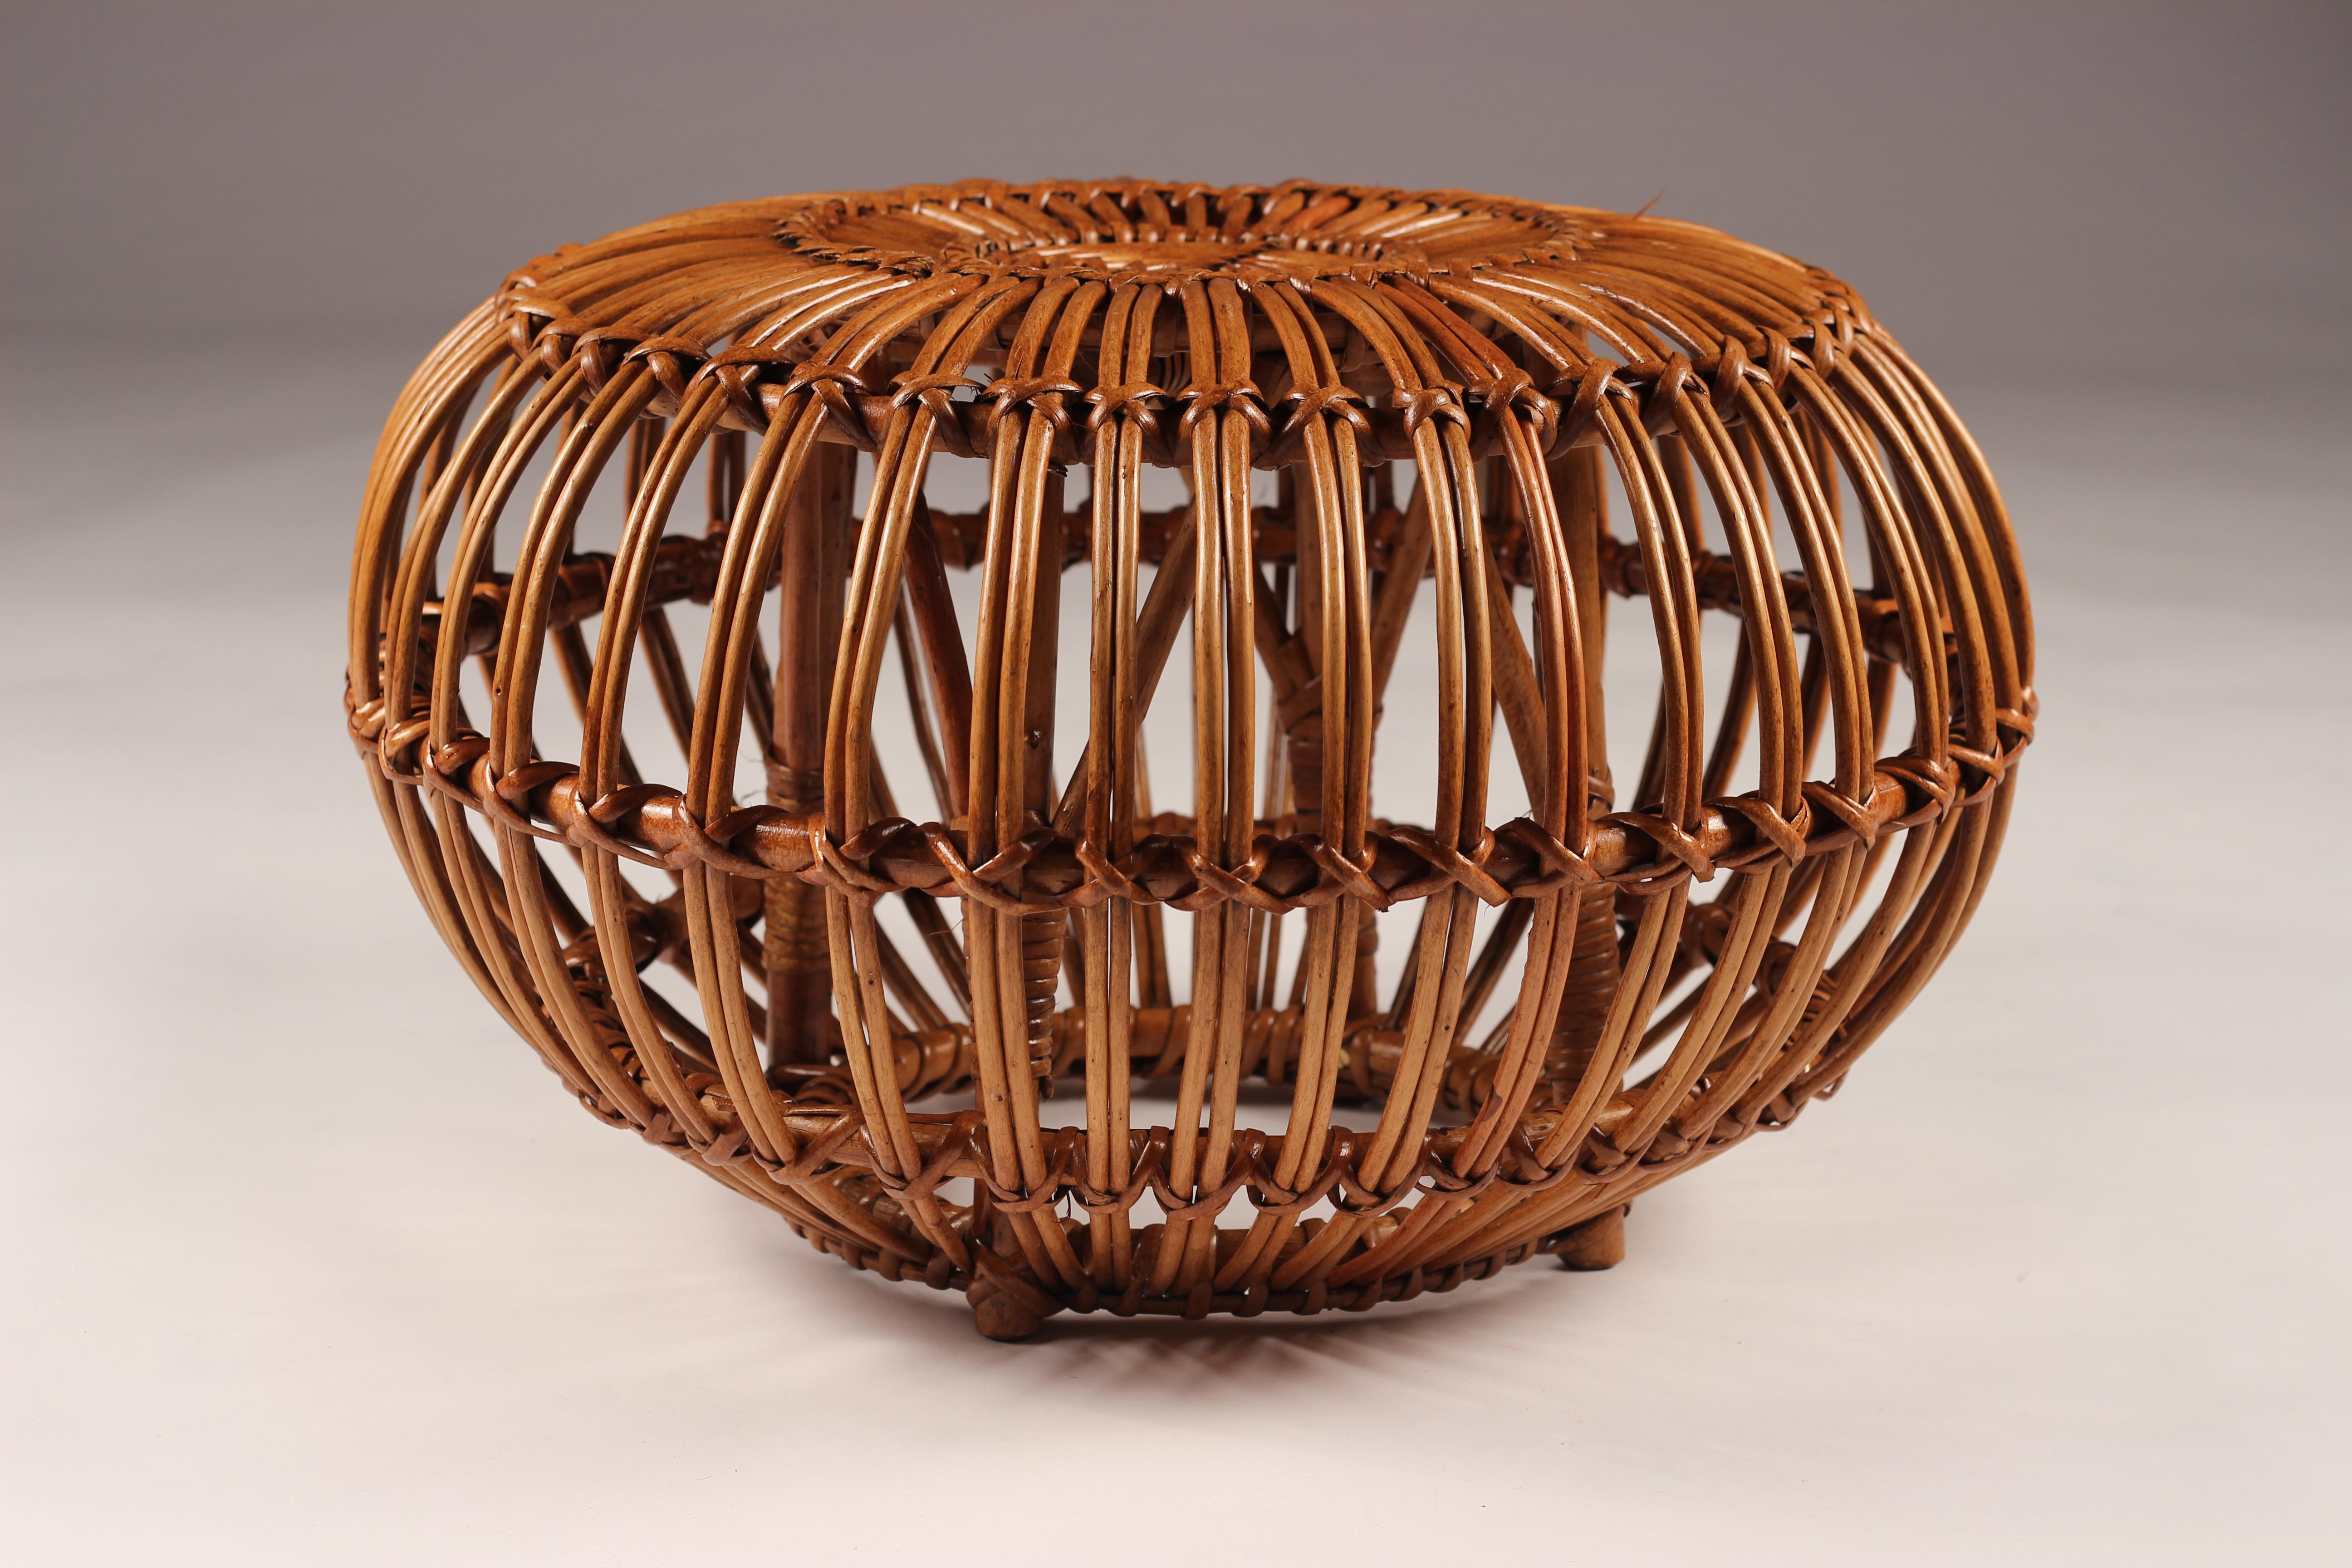 A vintage midcentury round wicker ottoman, stool or side table in good condition. A completely versatile piece that adds warmth and a handmade craftsmanship. In the era of flower power and Bohemian thinking, this piece would make a complimentary